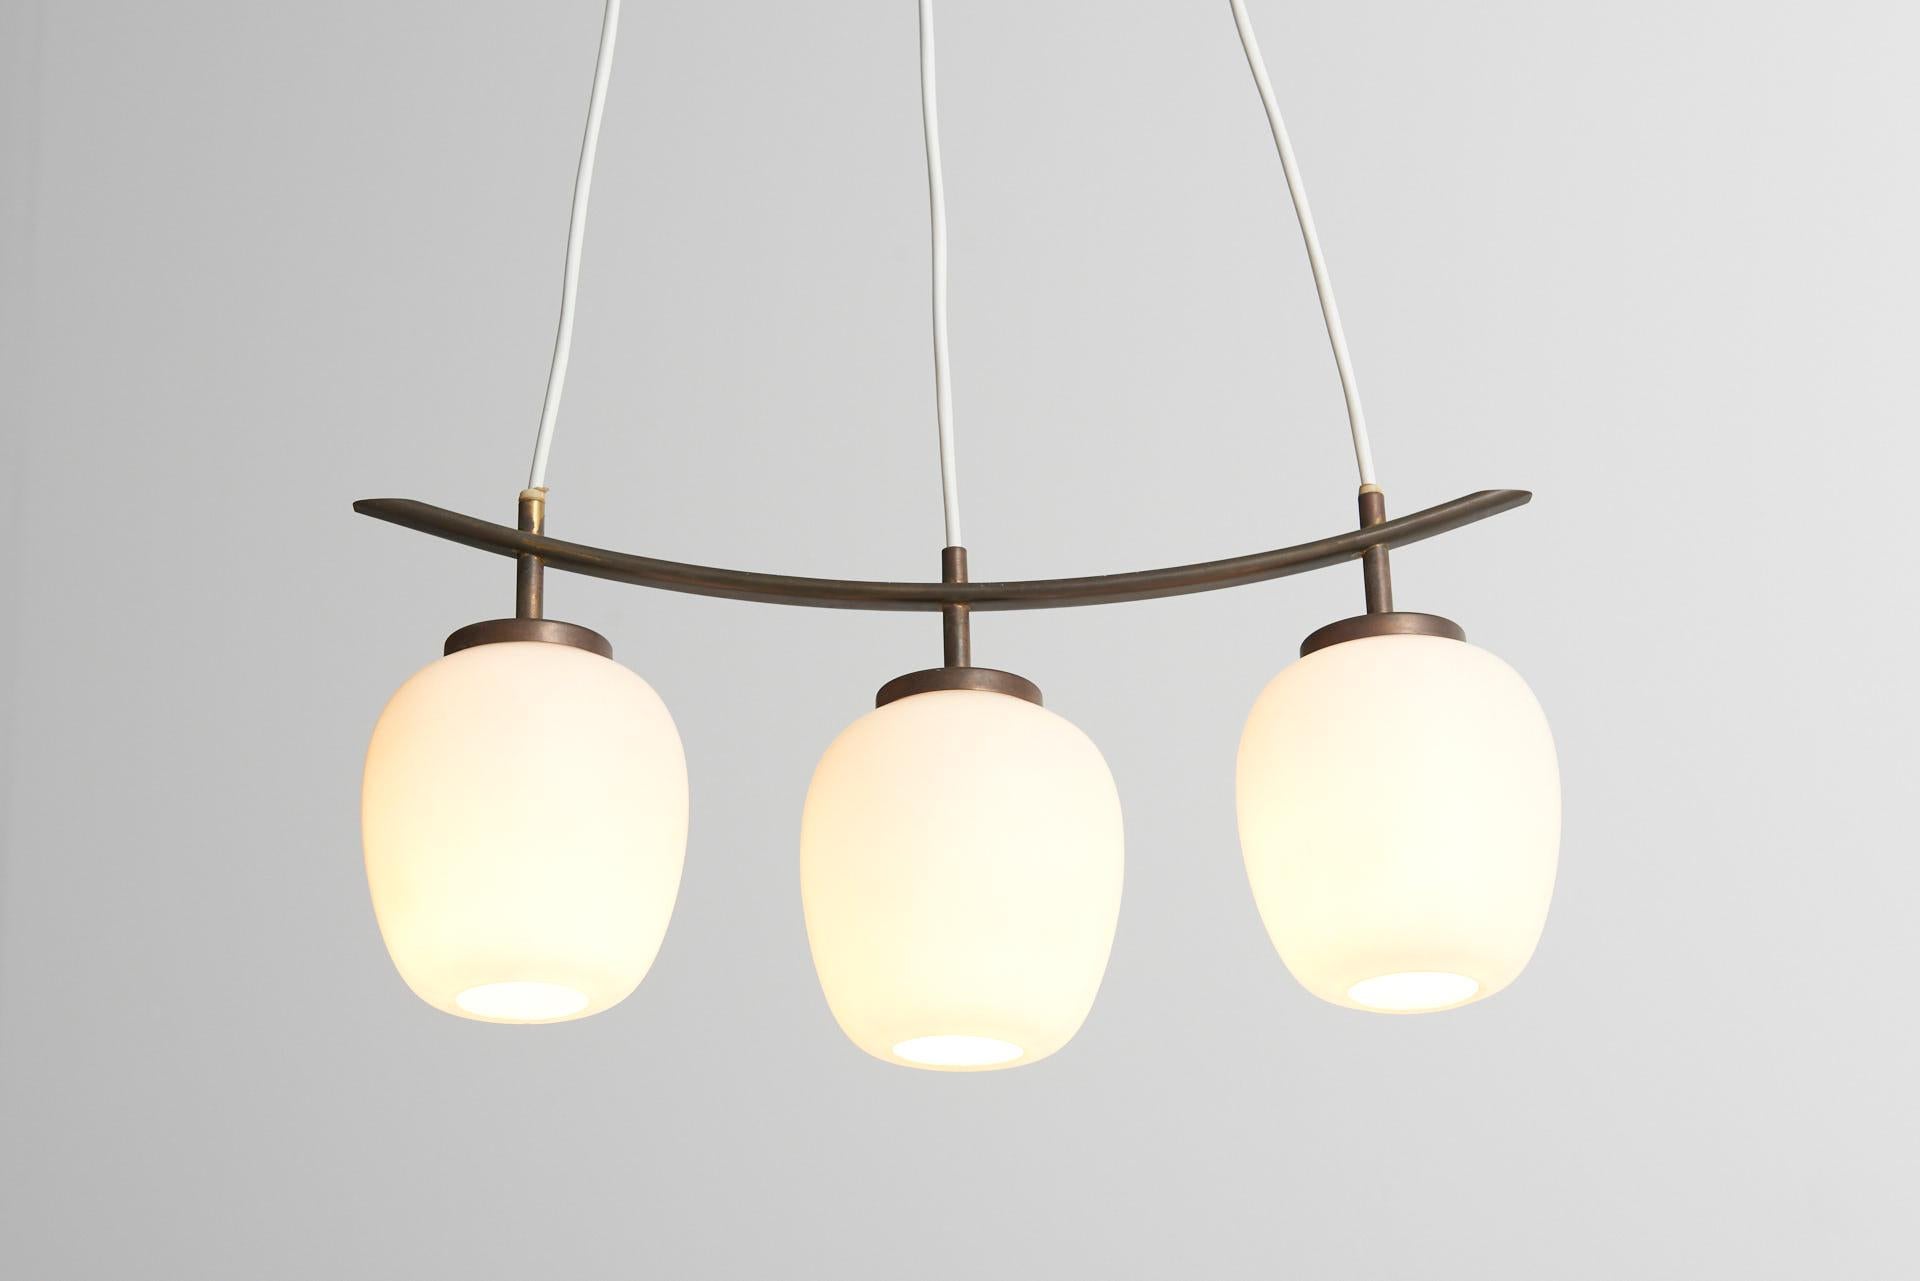 A rare pendant made of a curved brass frame with three opaline glass shades. Designed by Bent Karlby and made by chandeliers and pendants in Denmark, 1950s.